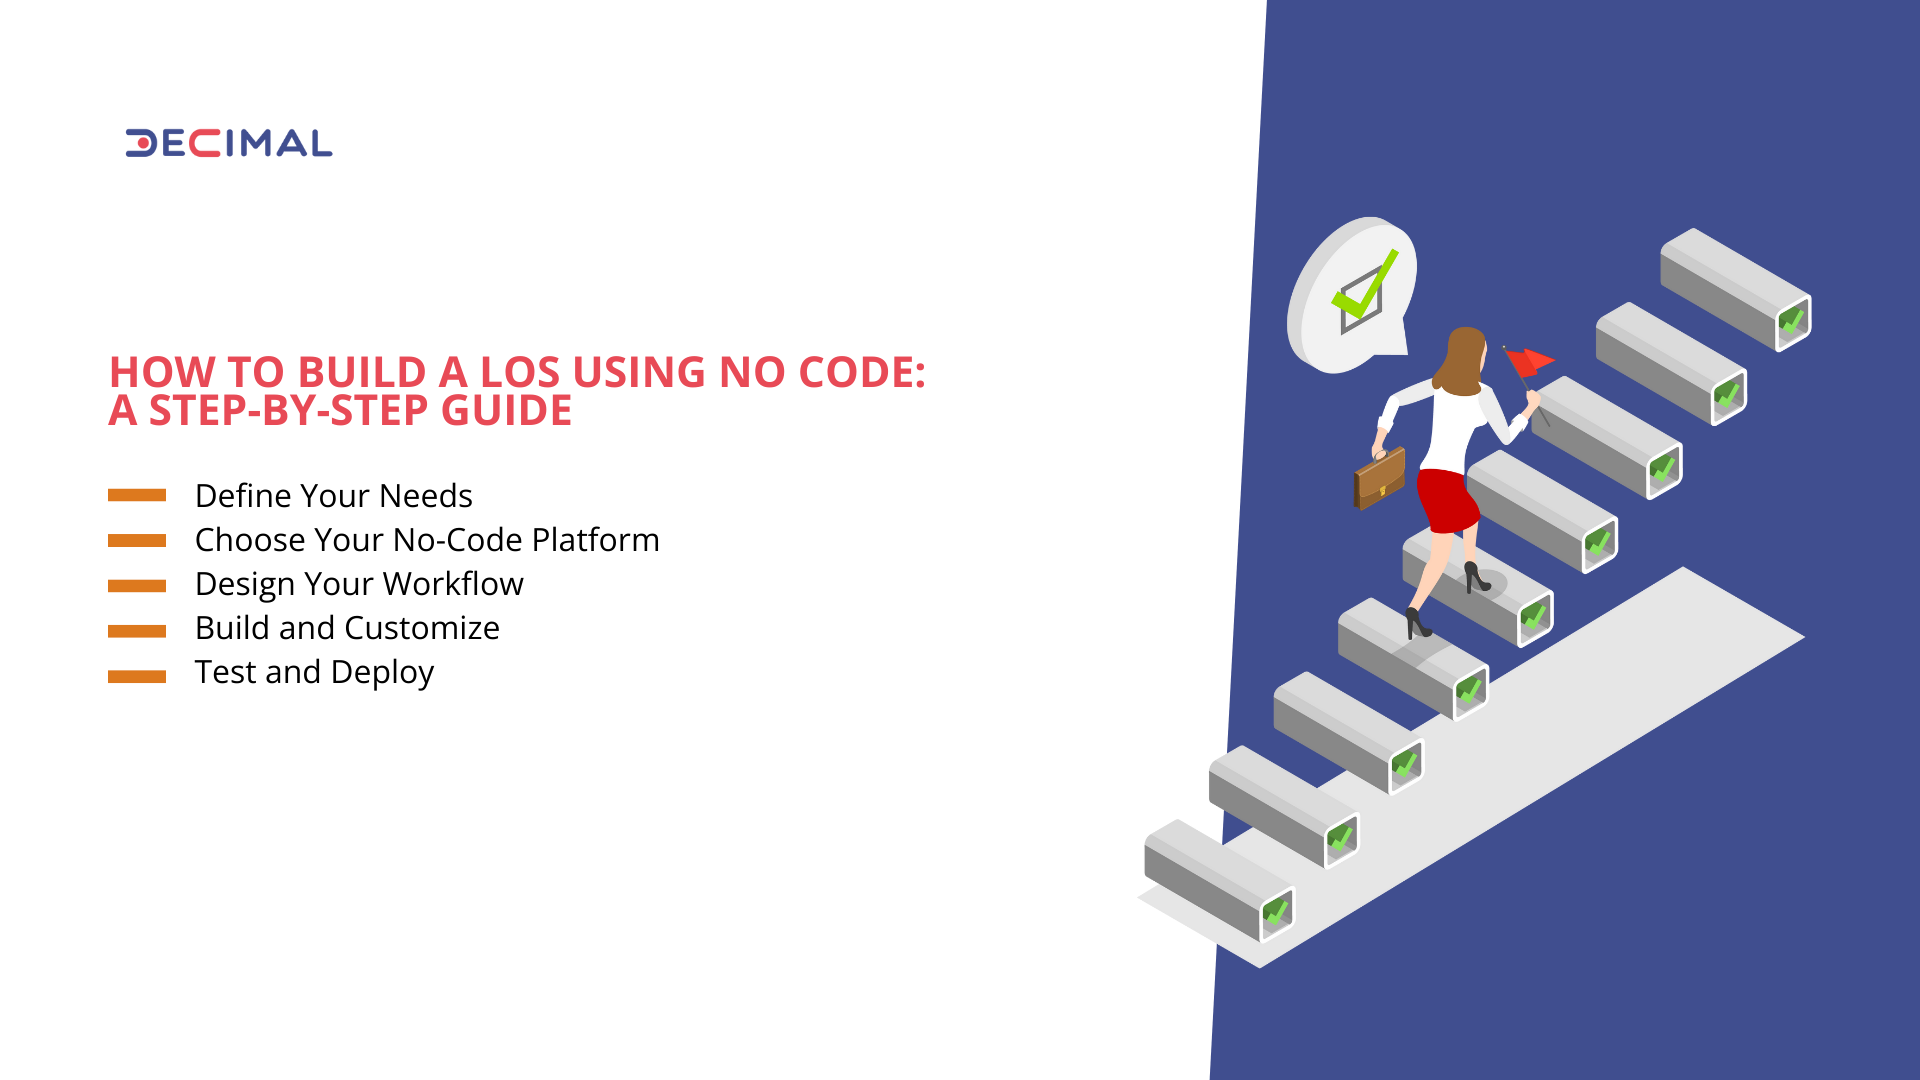 How to Build a LOS Using No Code